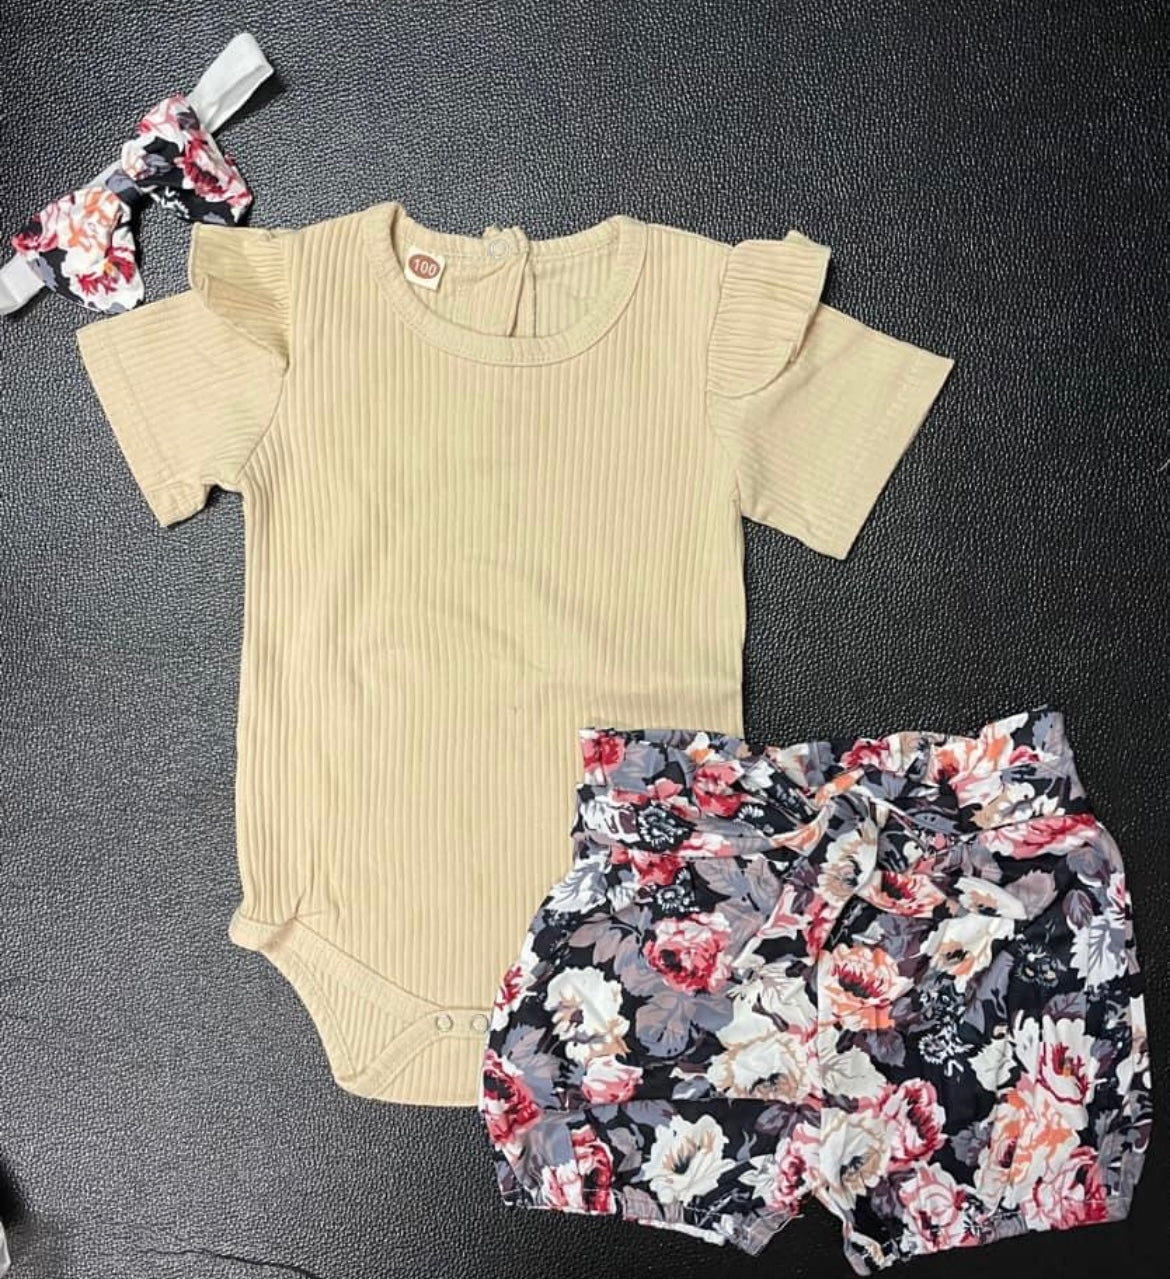 New baby 18-24 M Three piece outfit Boutique